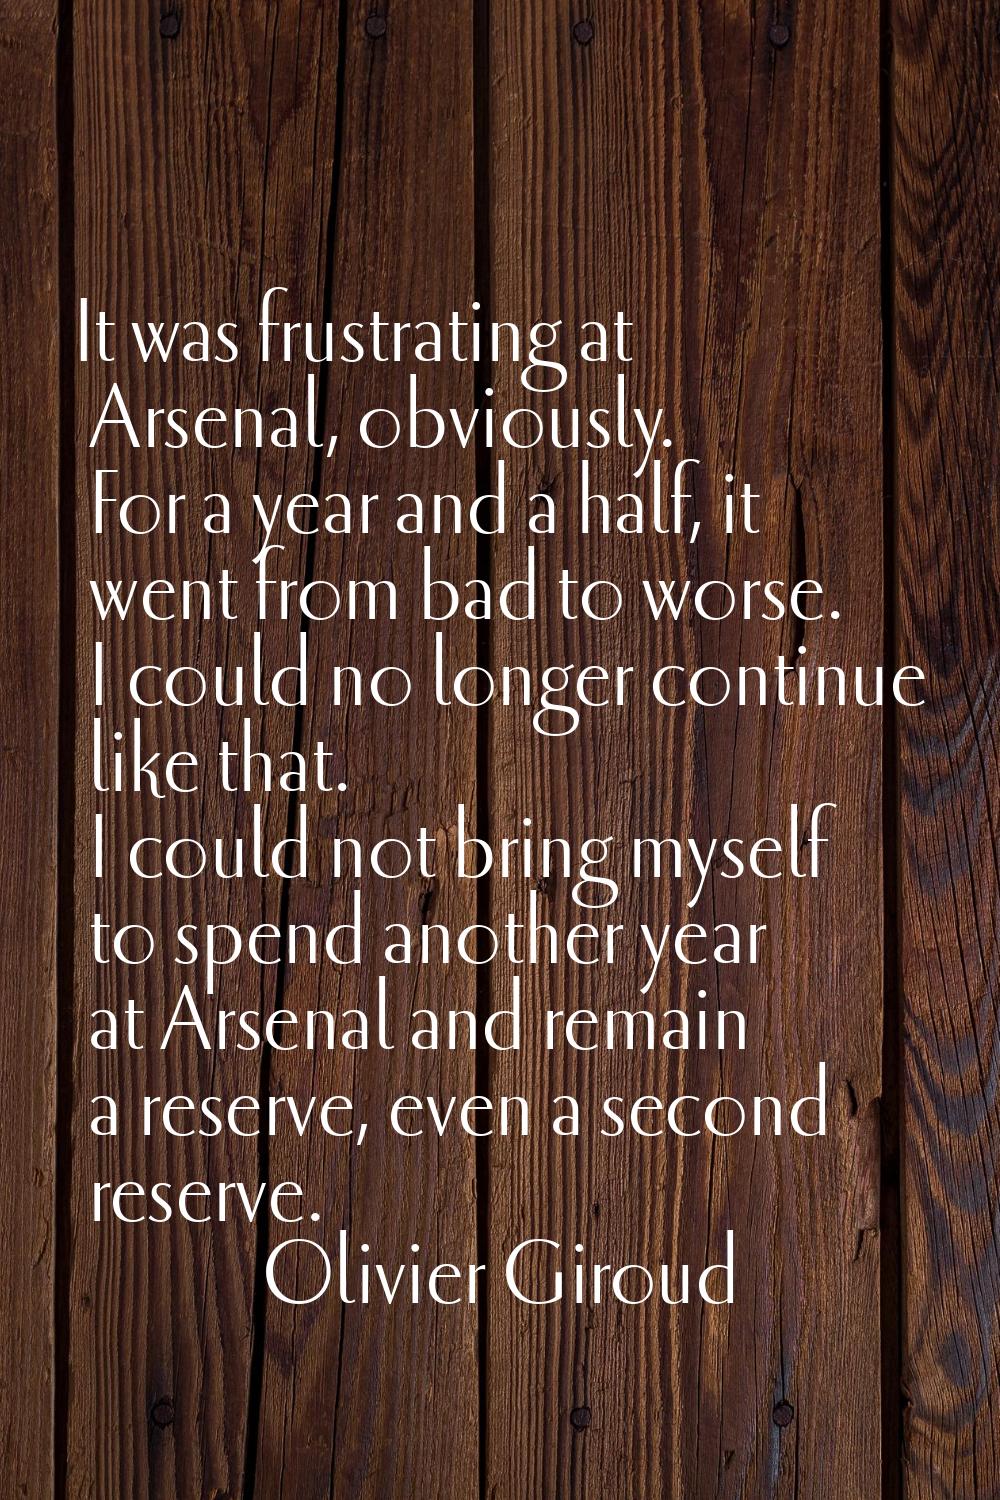 It was frustrating at Arsenal, obviously. For a year and a half, it went from bad to worse. I could